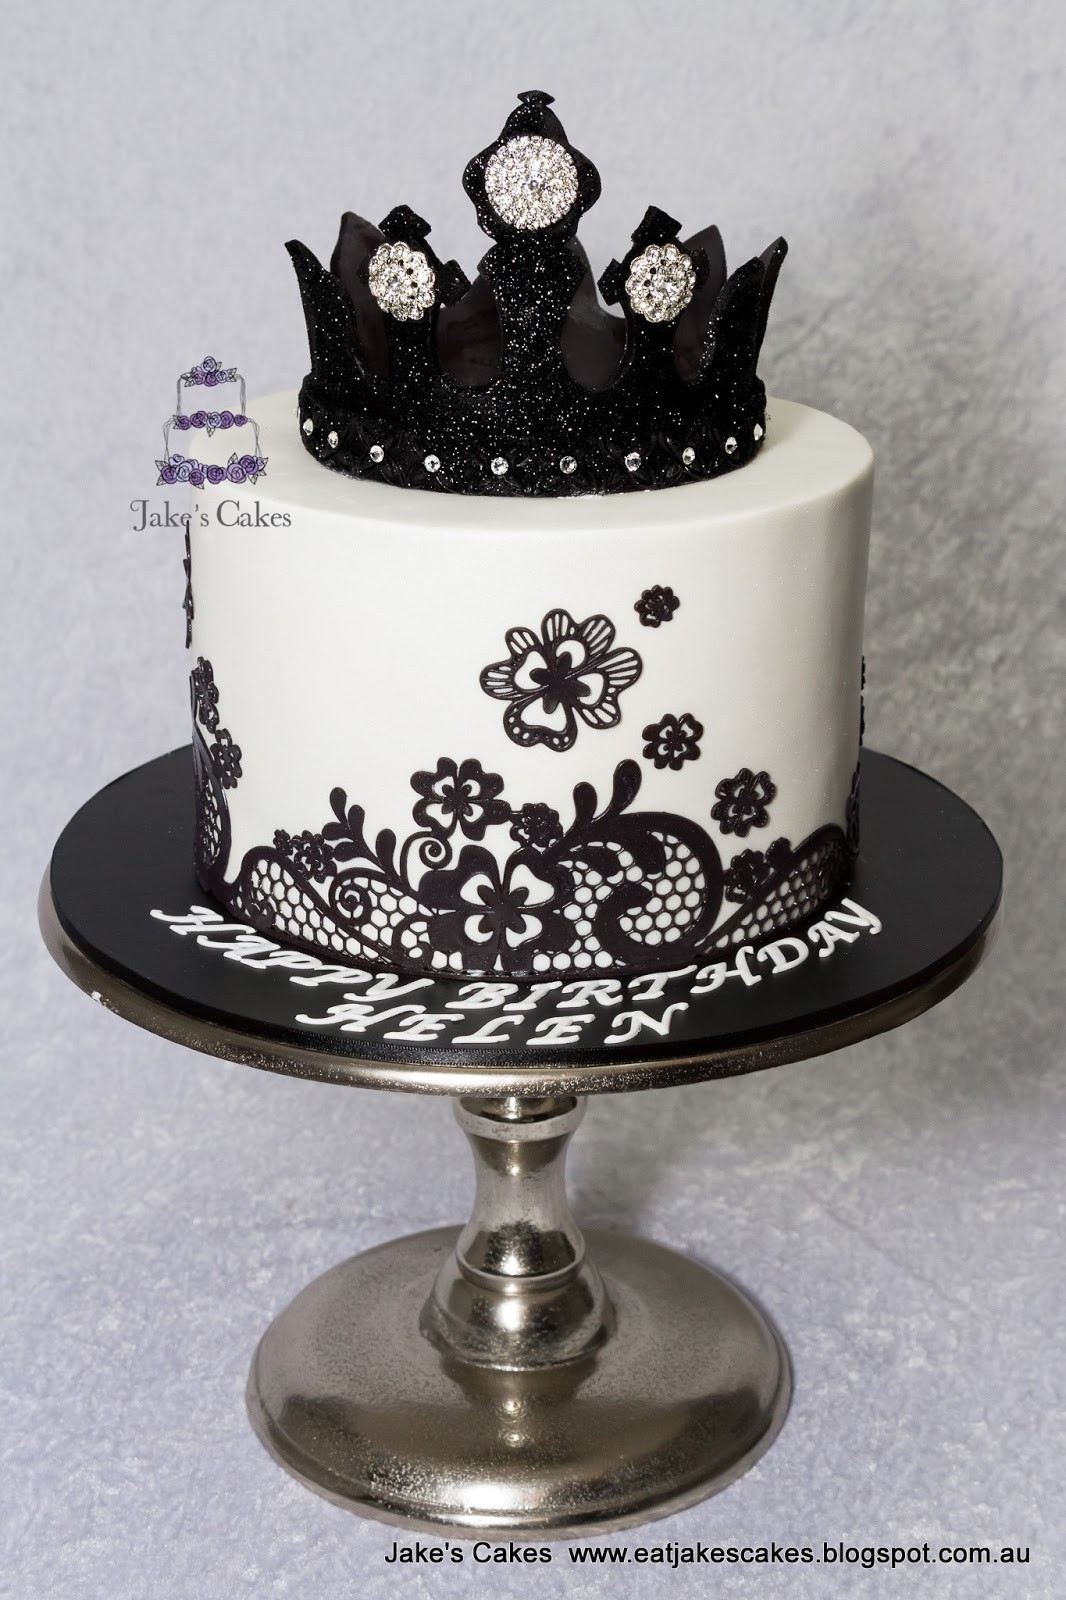 Best ideas about Black Birthday Cake
. Save or Pin Jake s Cakes Black Bling Crown cake Now.